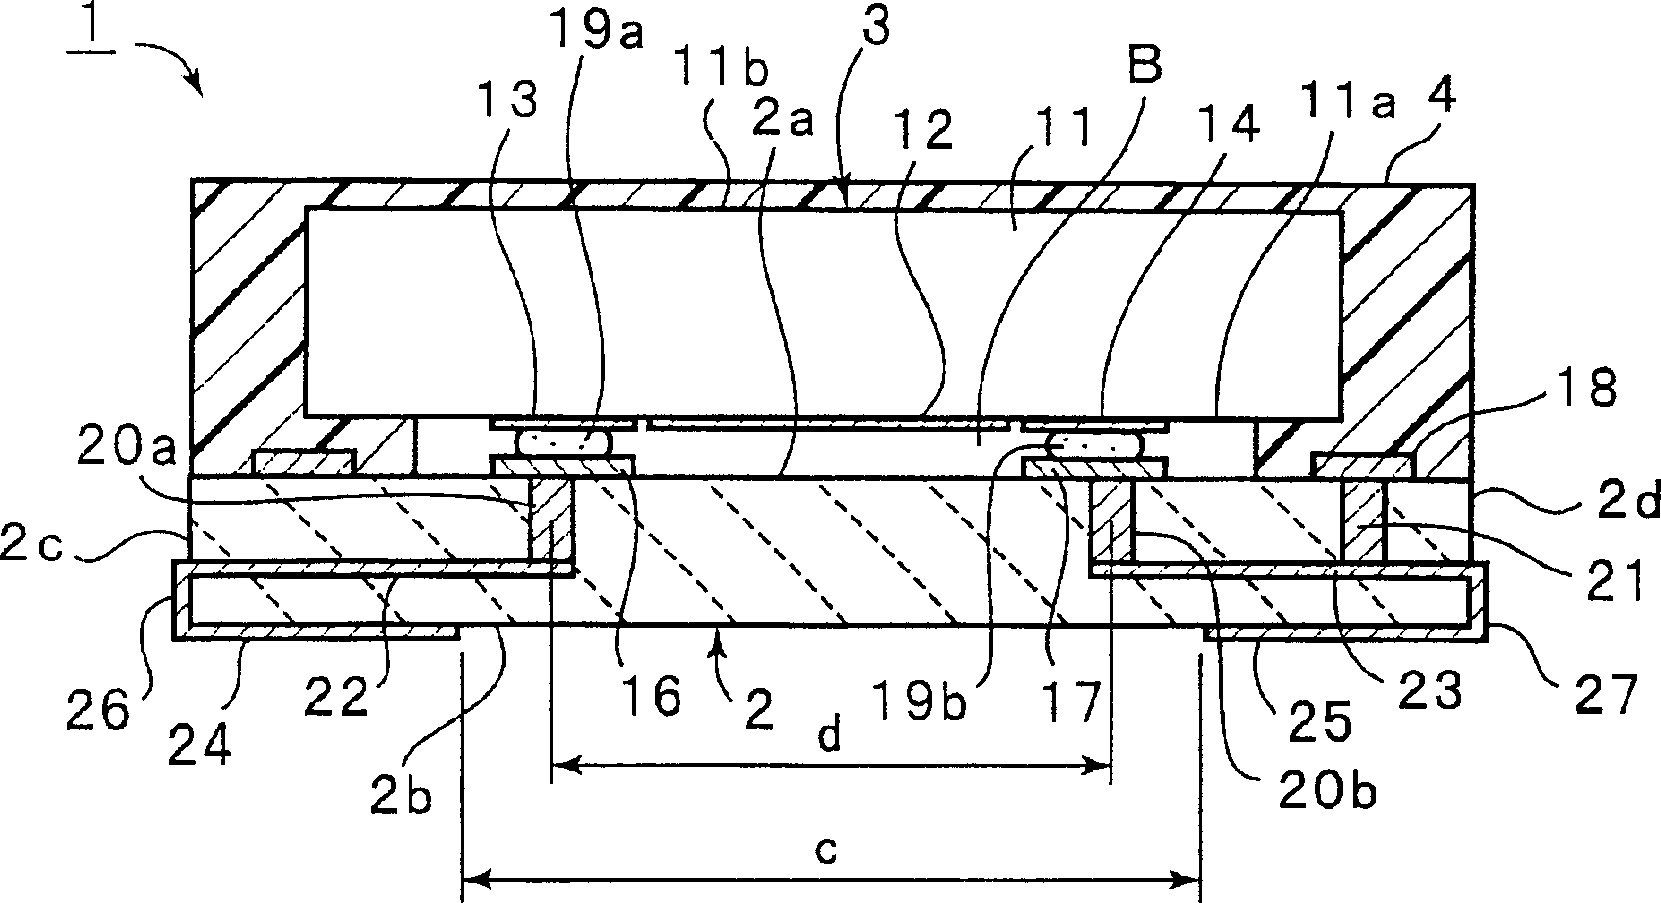 Acoustic surface wave device